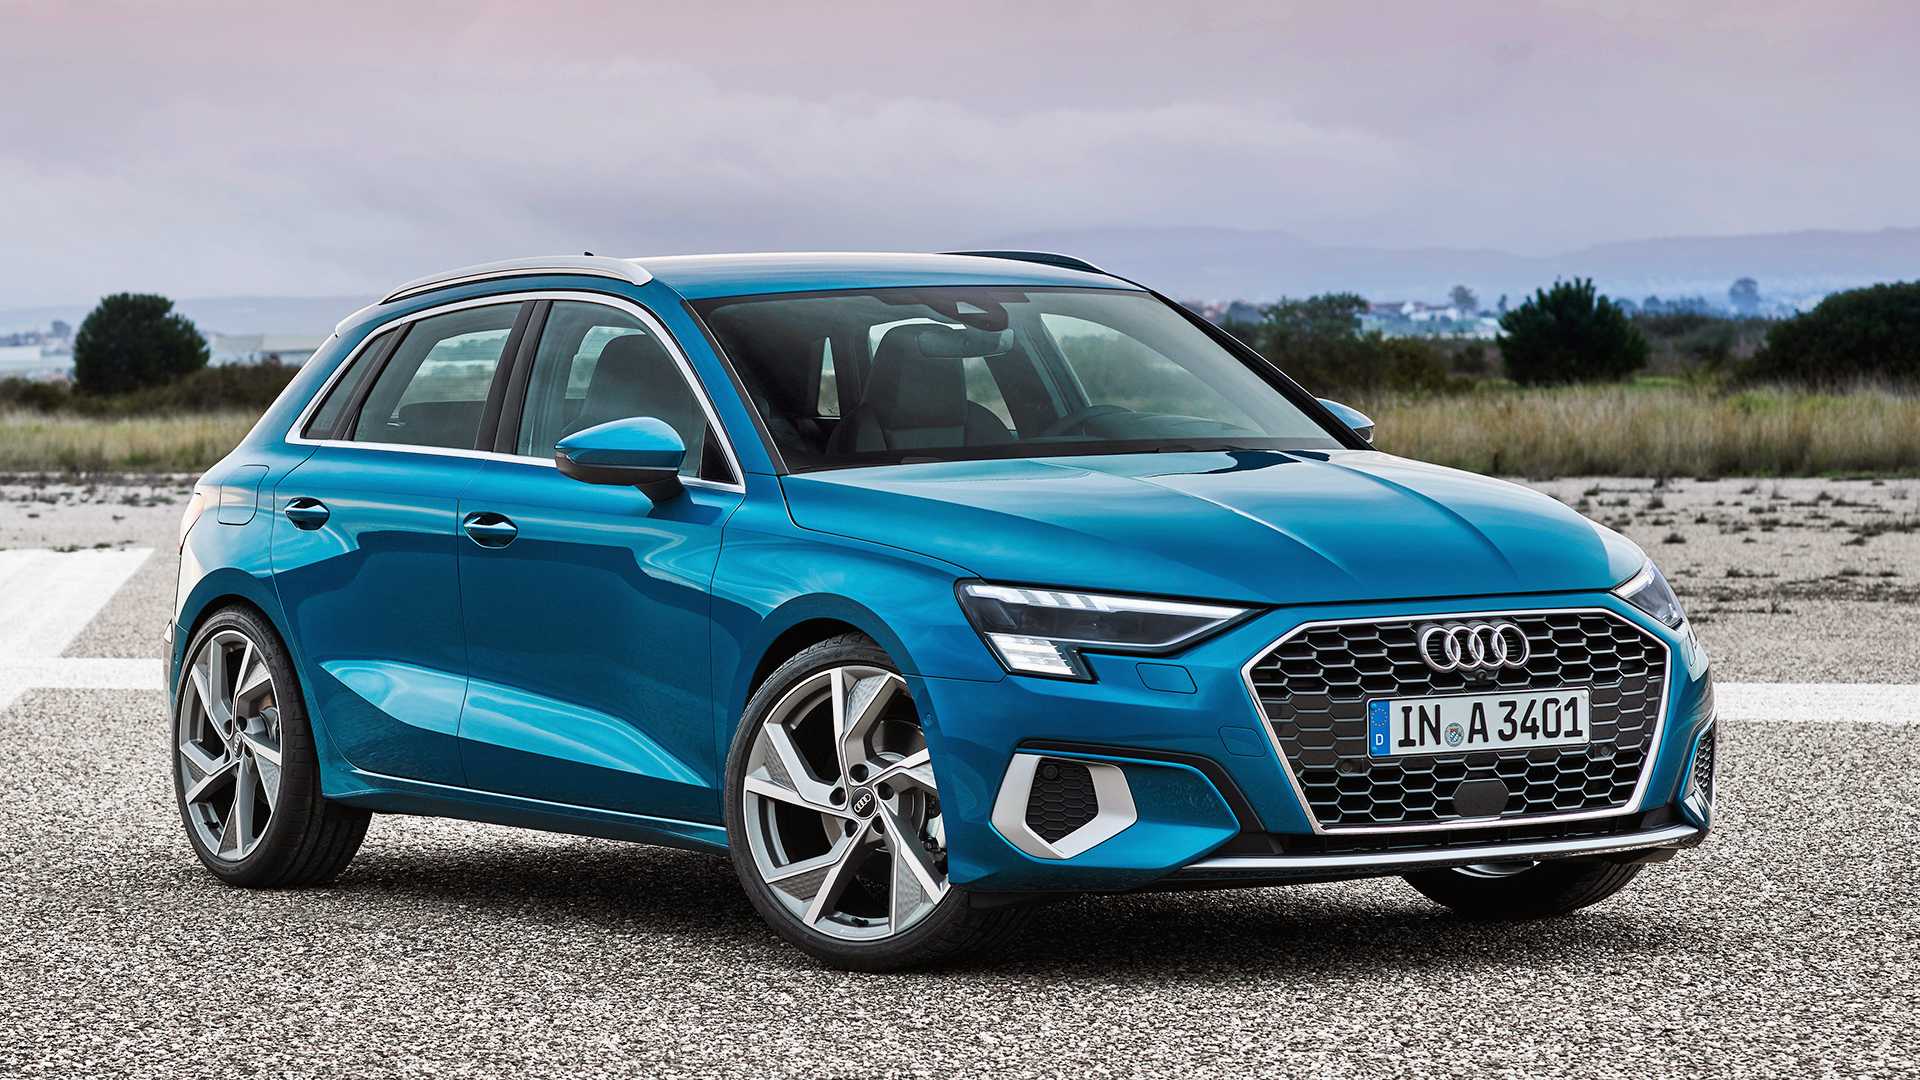 2021 Audi A3 Hatchback Debuts Mini-RS6 Styling, Major Interior Changes - autoevolution